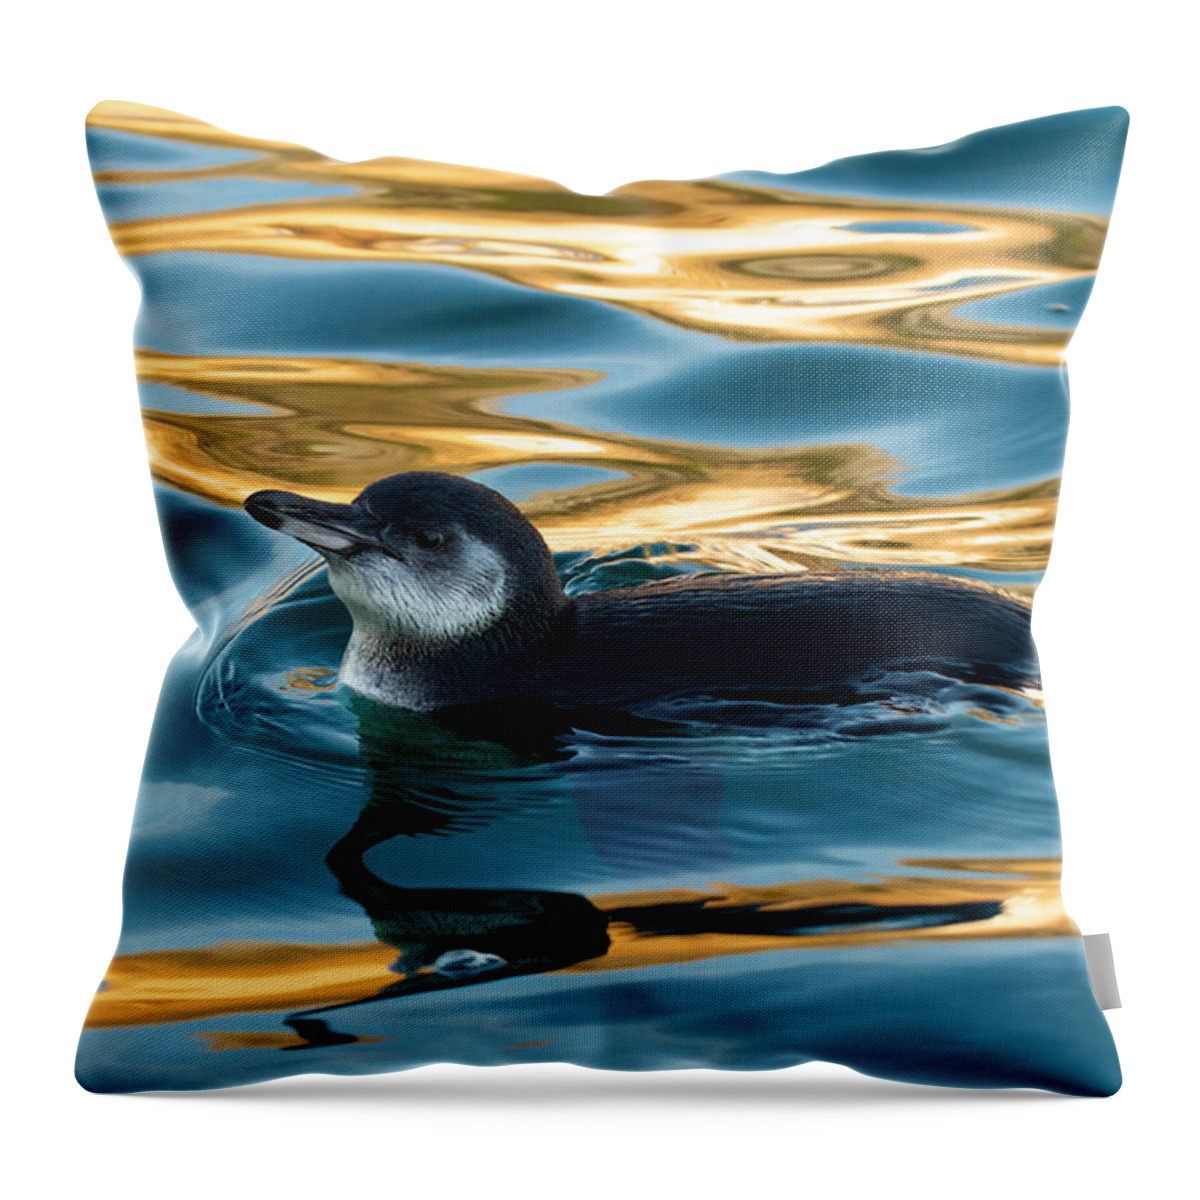 Galapagos Islands Throw Pillow featuring the photograph Penguin Watercolor 2 by David Beebe